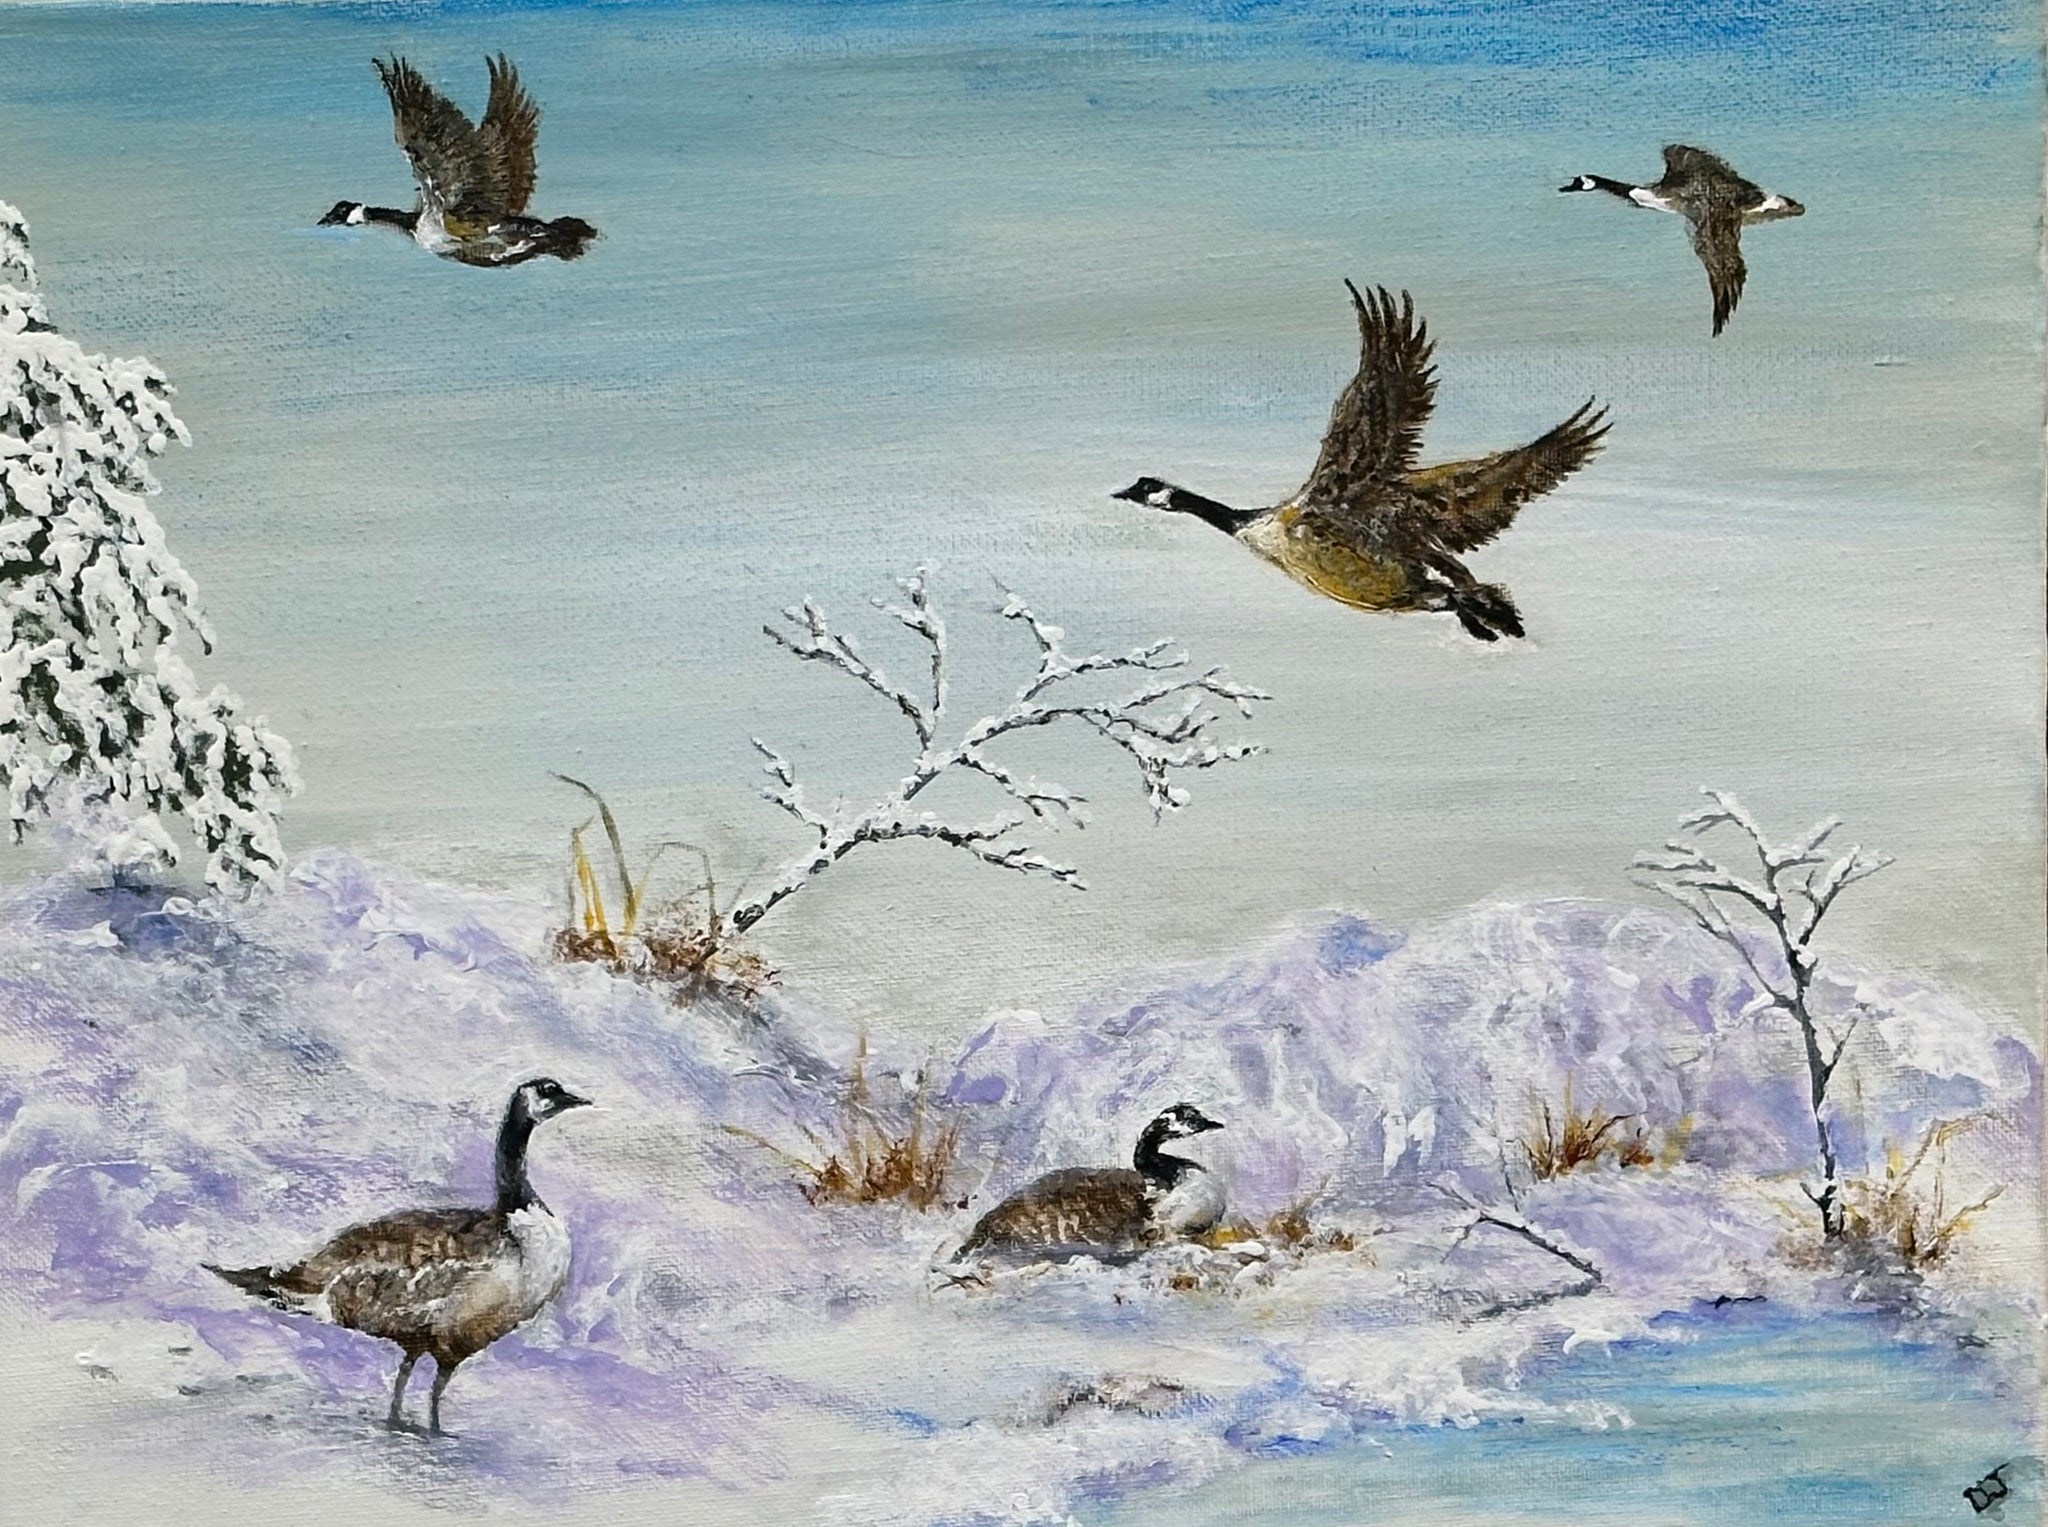 CANADIAN GEESE IN WINTER